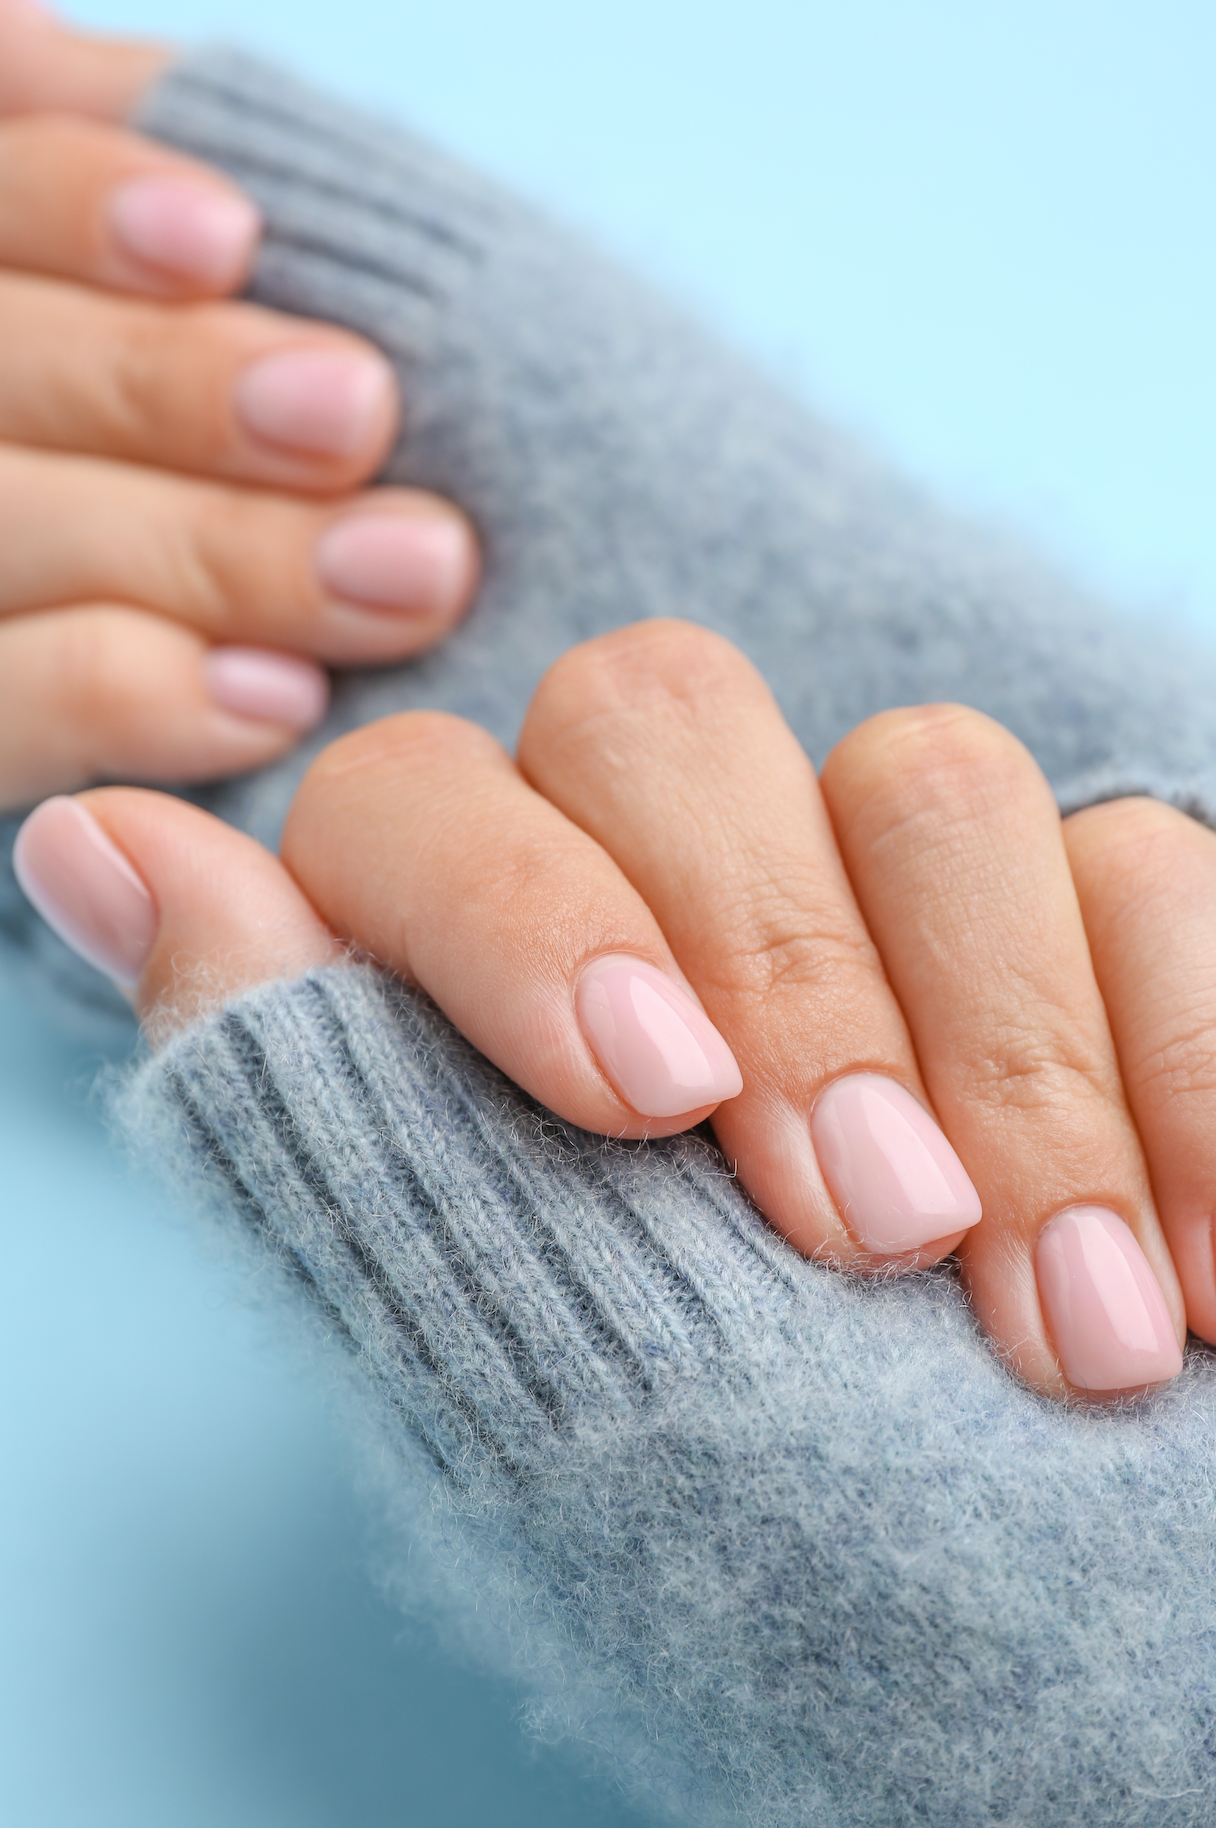 Xuefei Salon - •Nail Facts• The rate of nail growth is affected by a lot of  things like gender, hormones, weather and hand activity. On average, fingernails  grow for about 3.5 millimeters